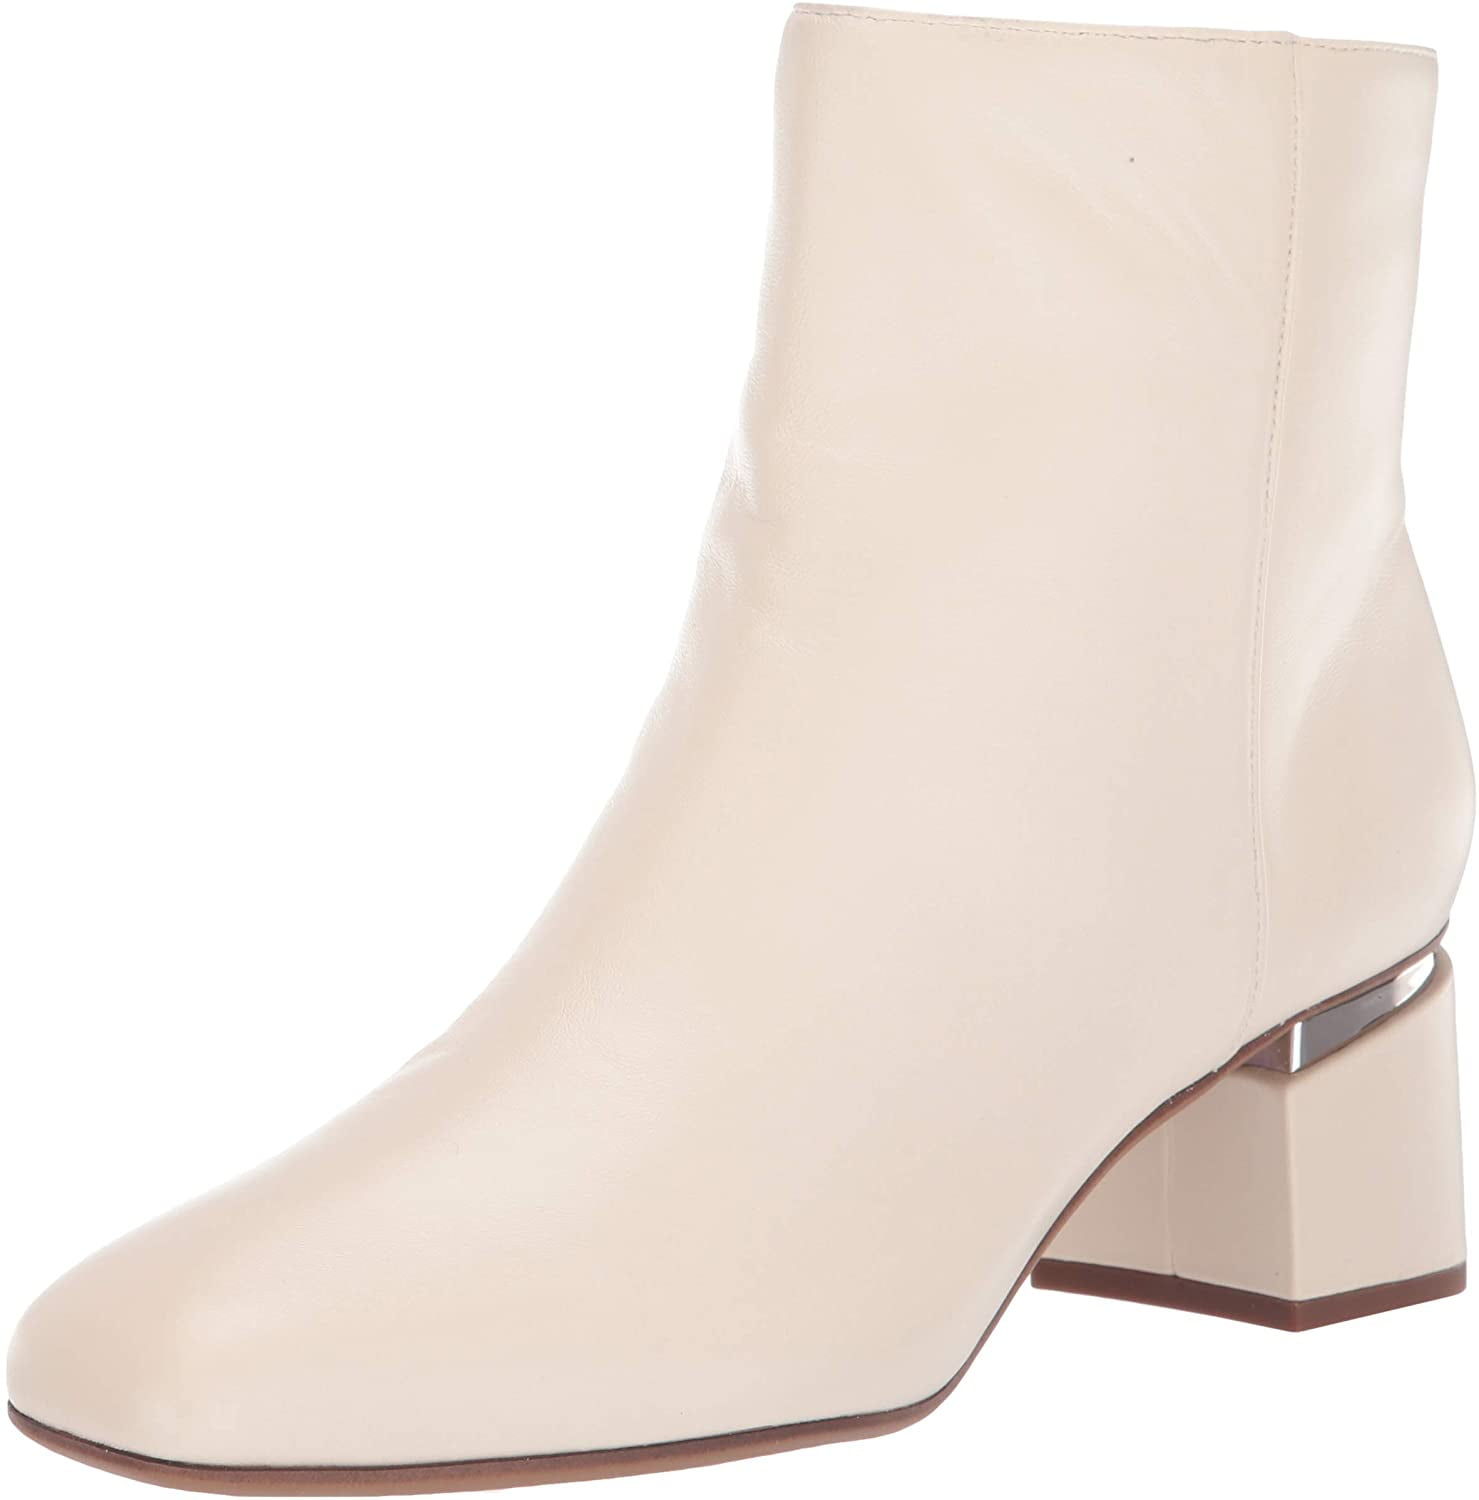 Franco Sarto Women's Marquee Ankle Boot, Ivory Leather, 9 M US ...